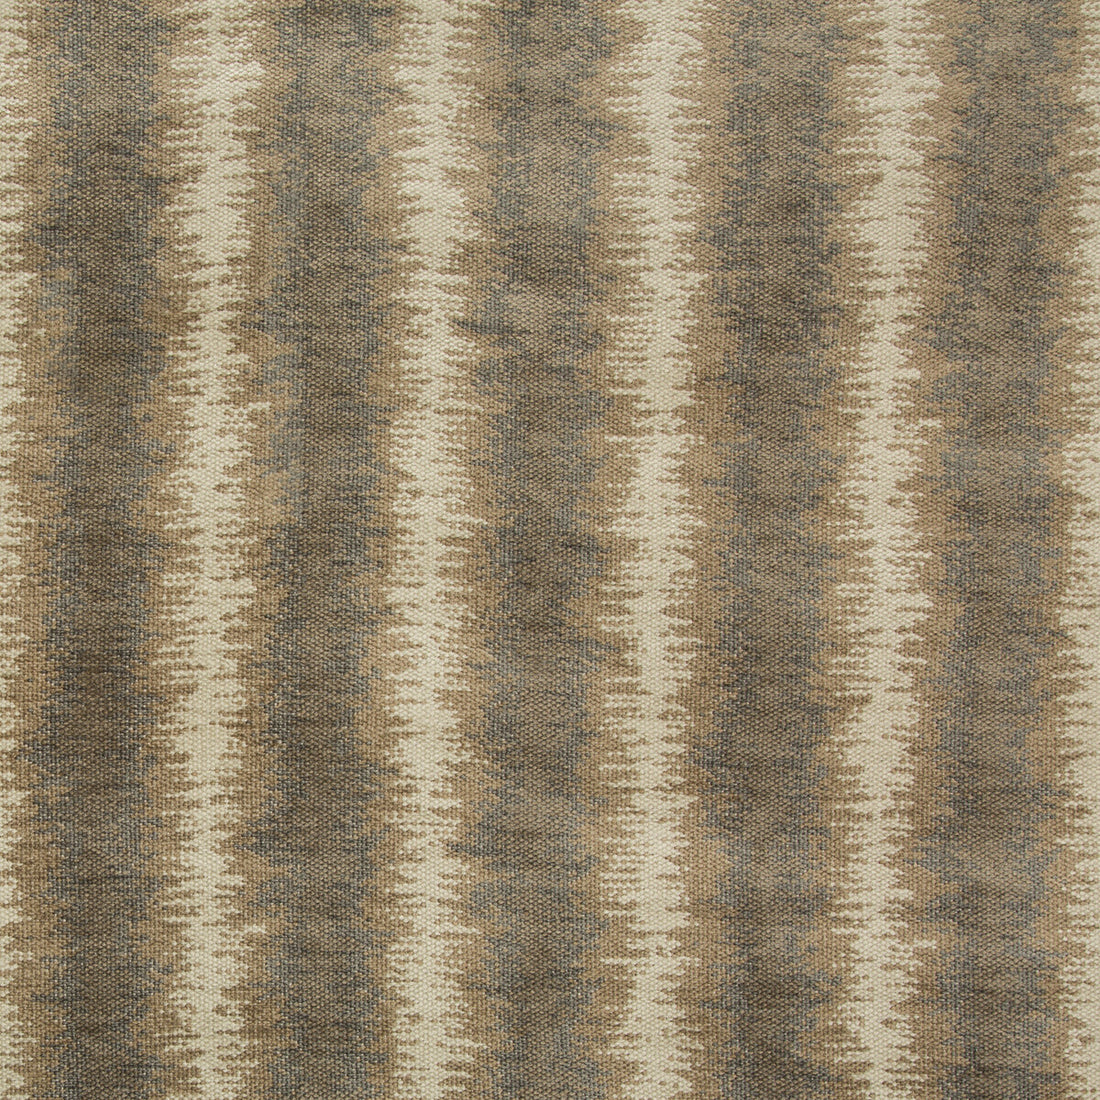 Canyon Land fabric in iron color - pattern 34838.106.0 - by Kravet Couture in the Barbara Barry Panorama collection